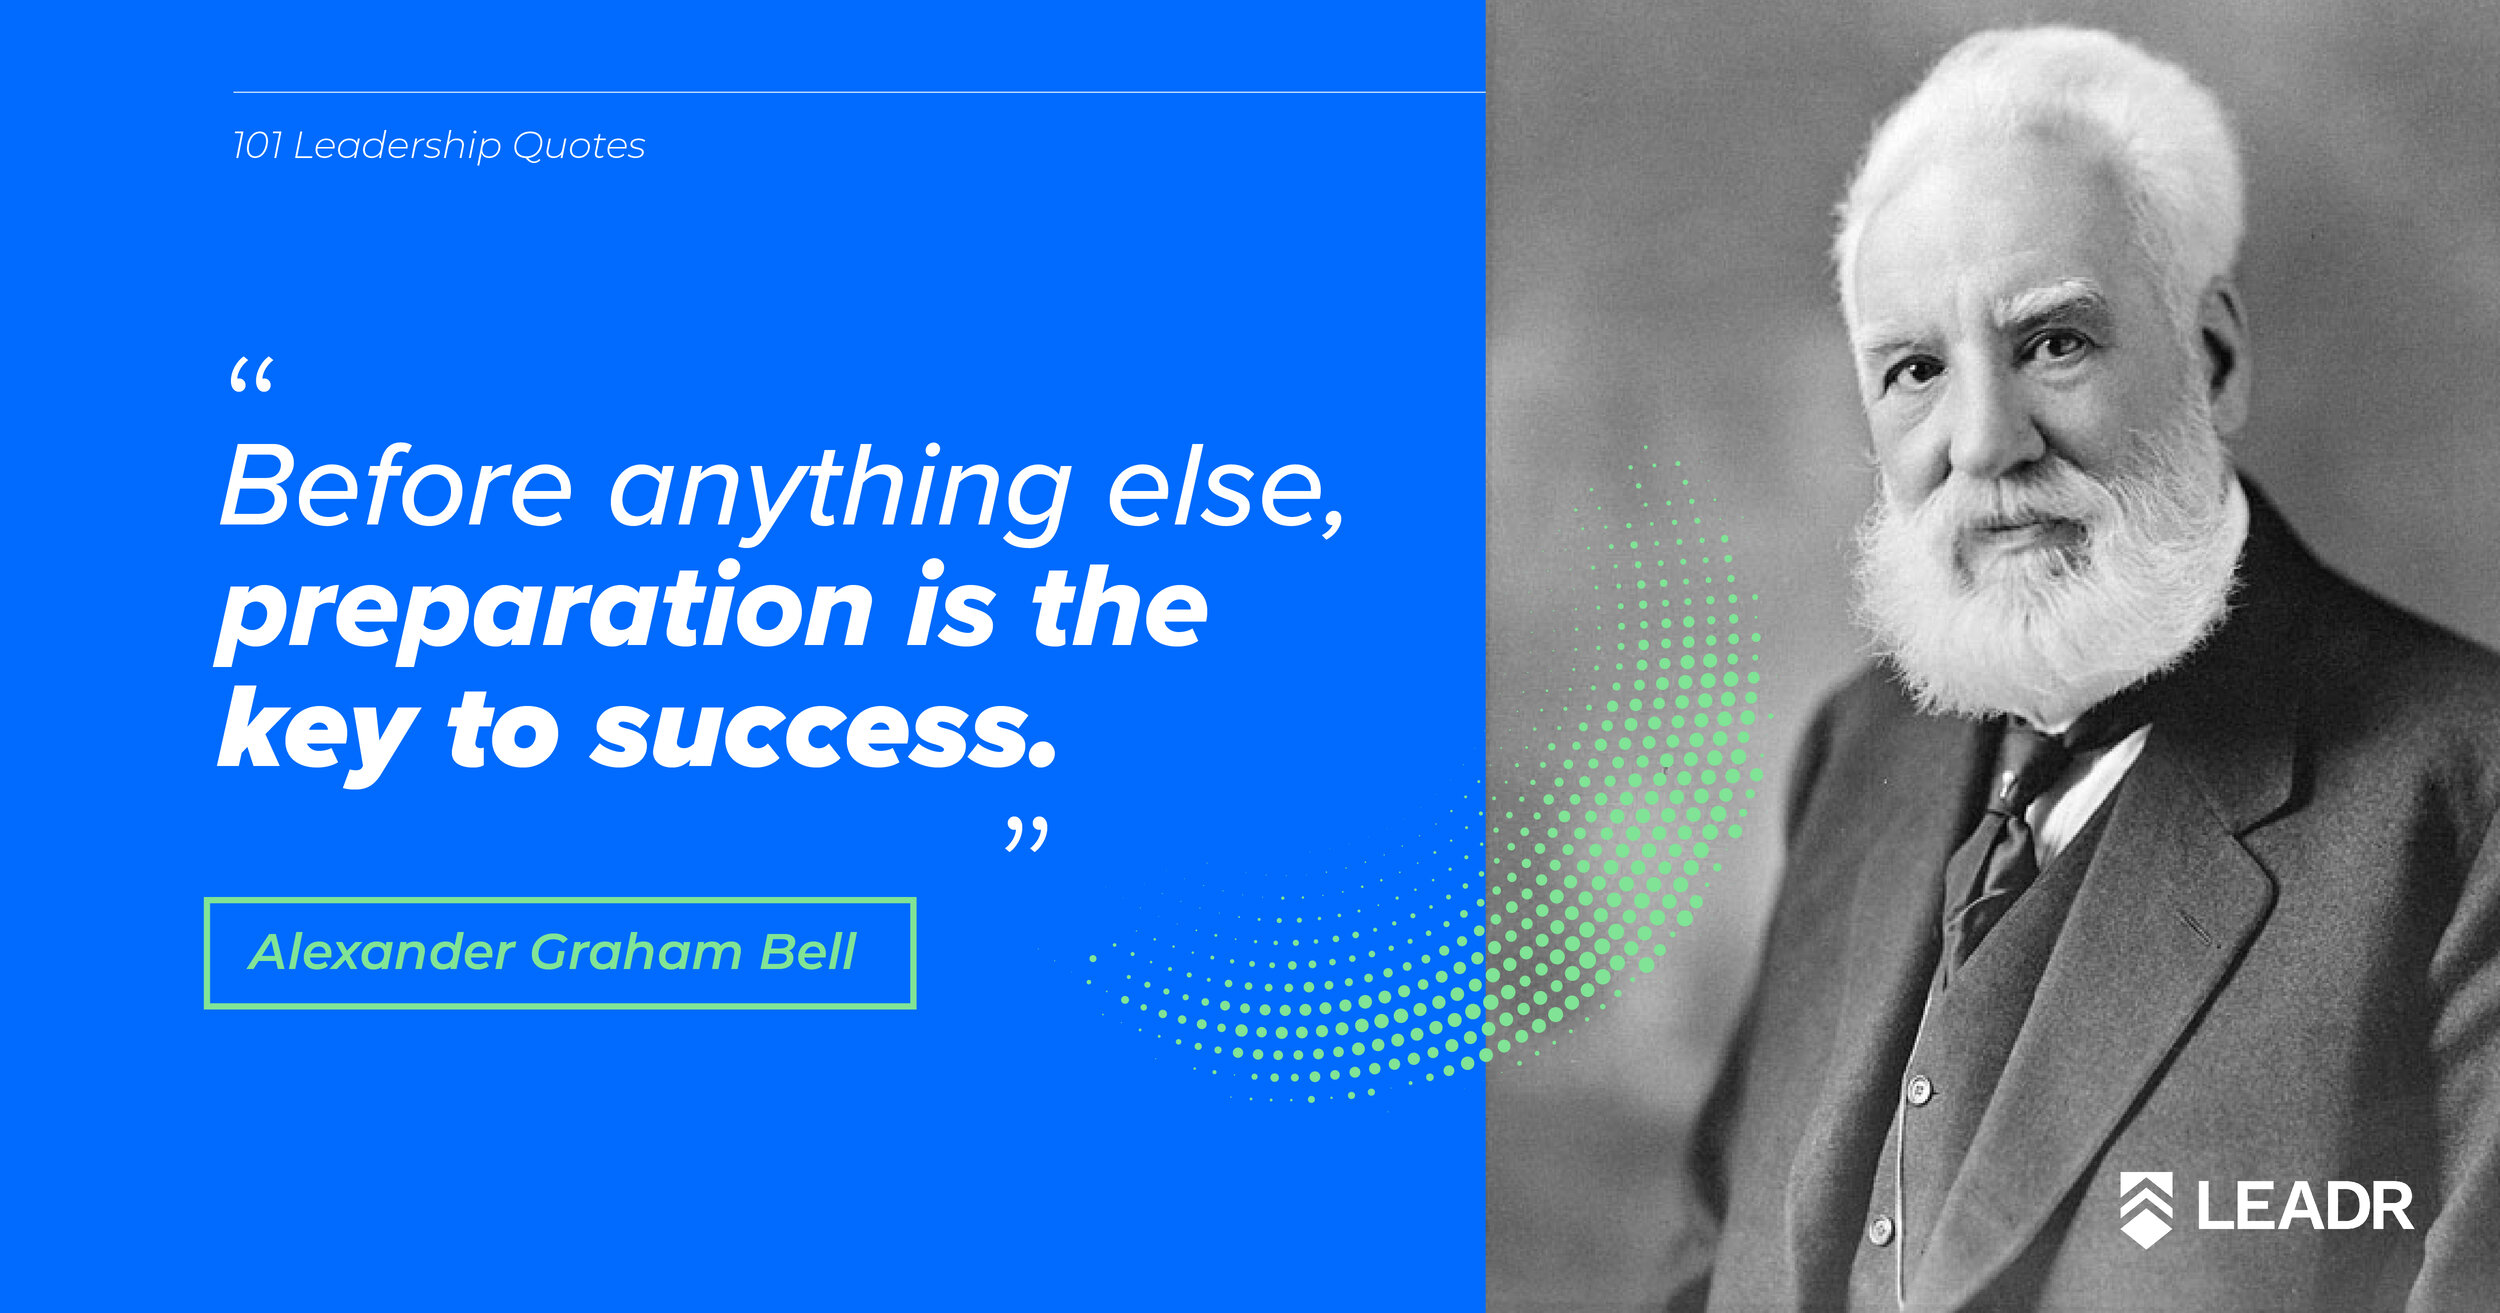 Royalty free downloadable leadership quotes - Alexander Graham Bell